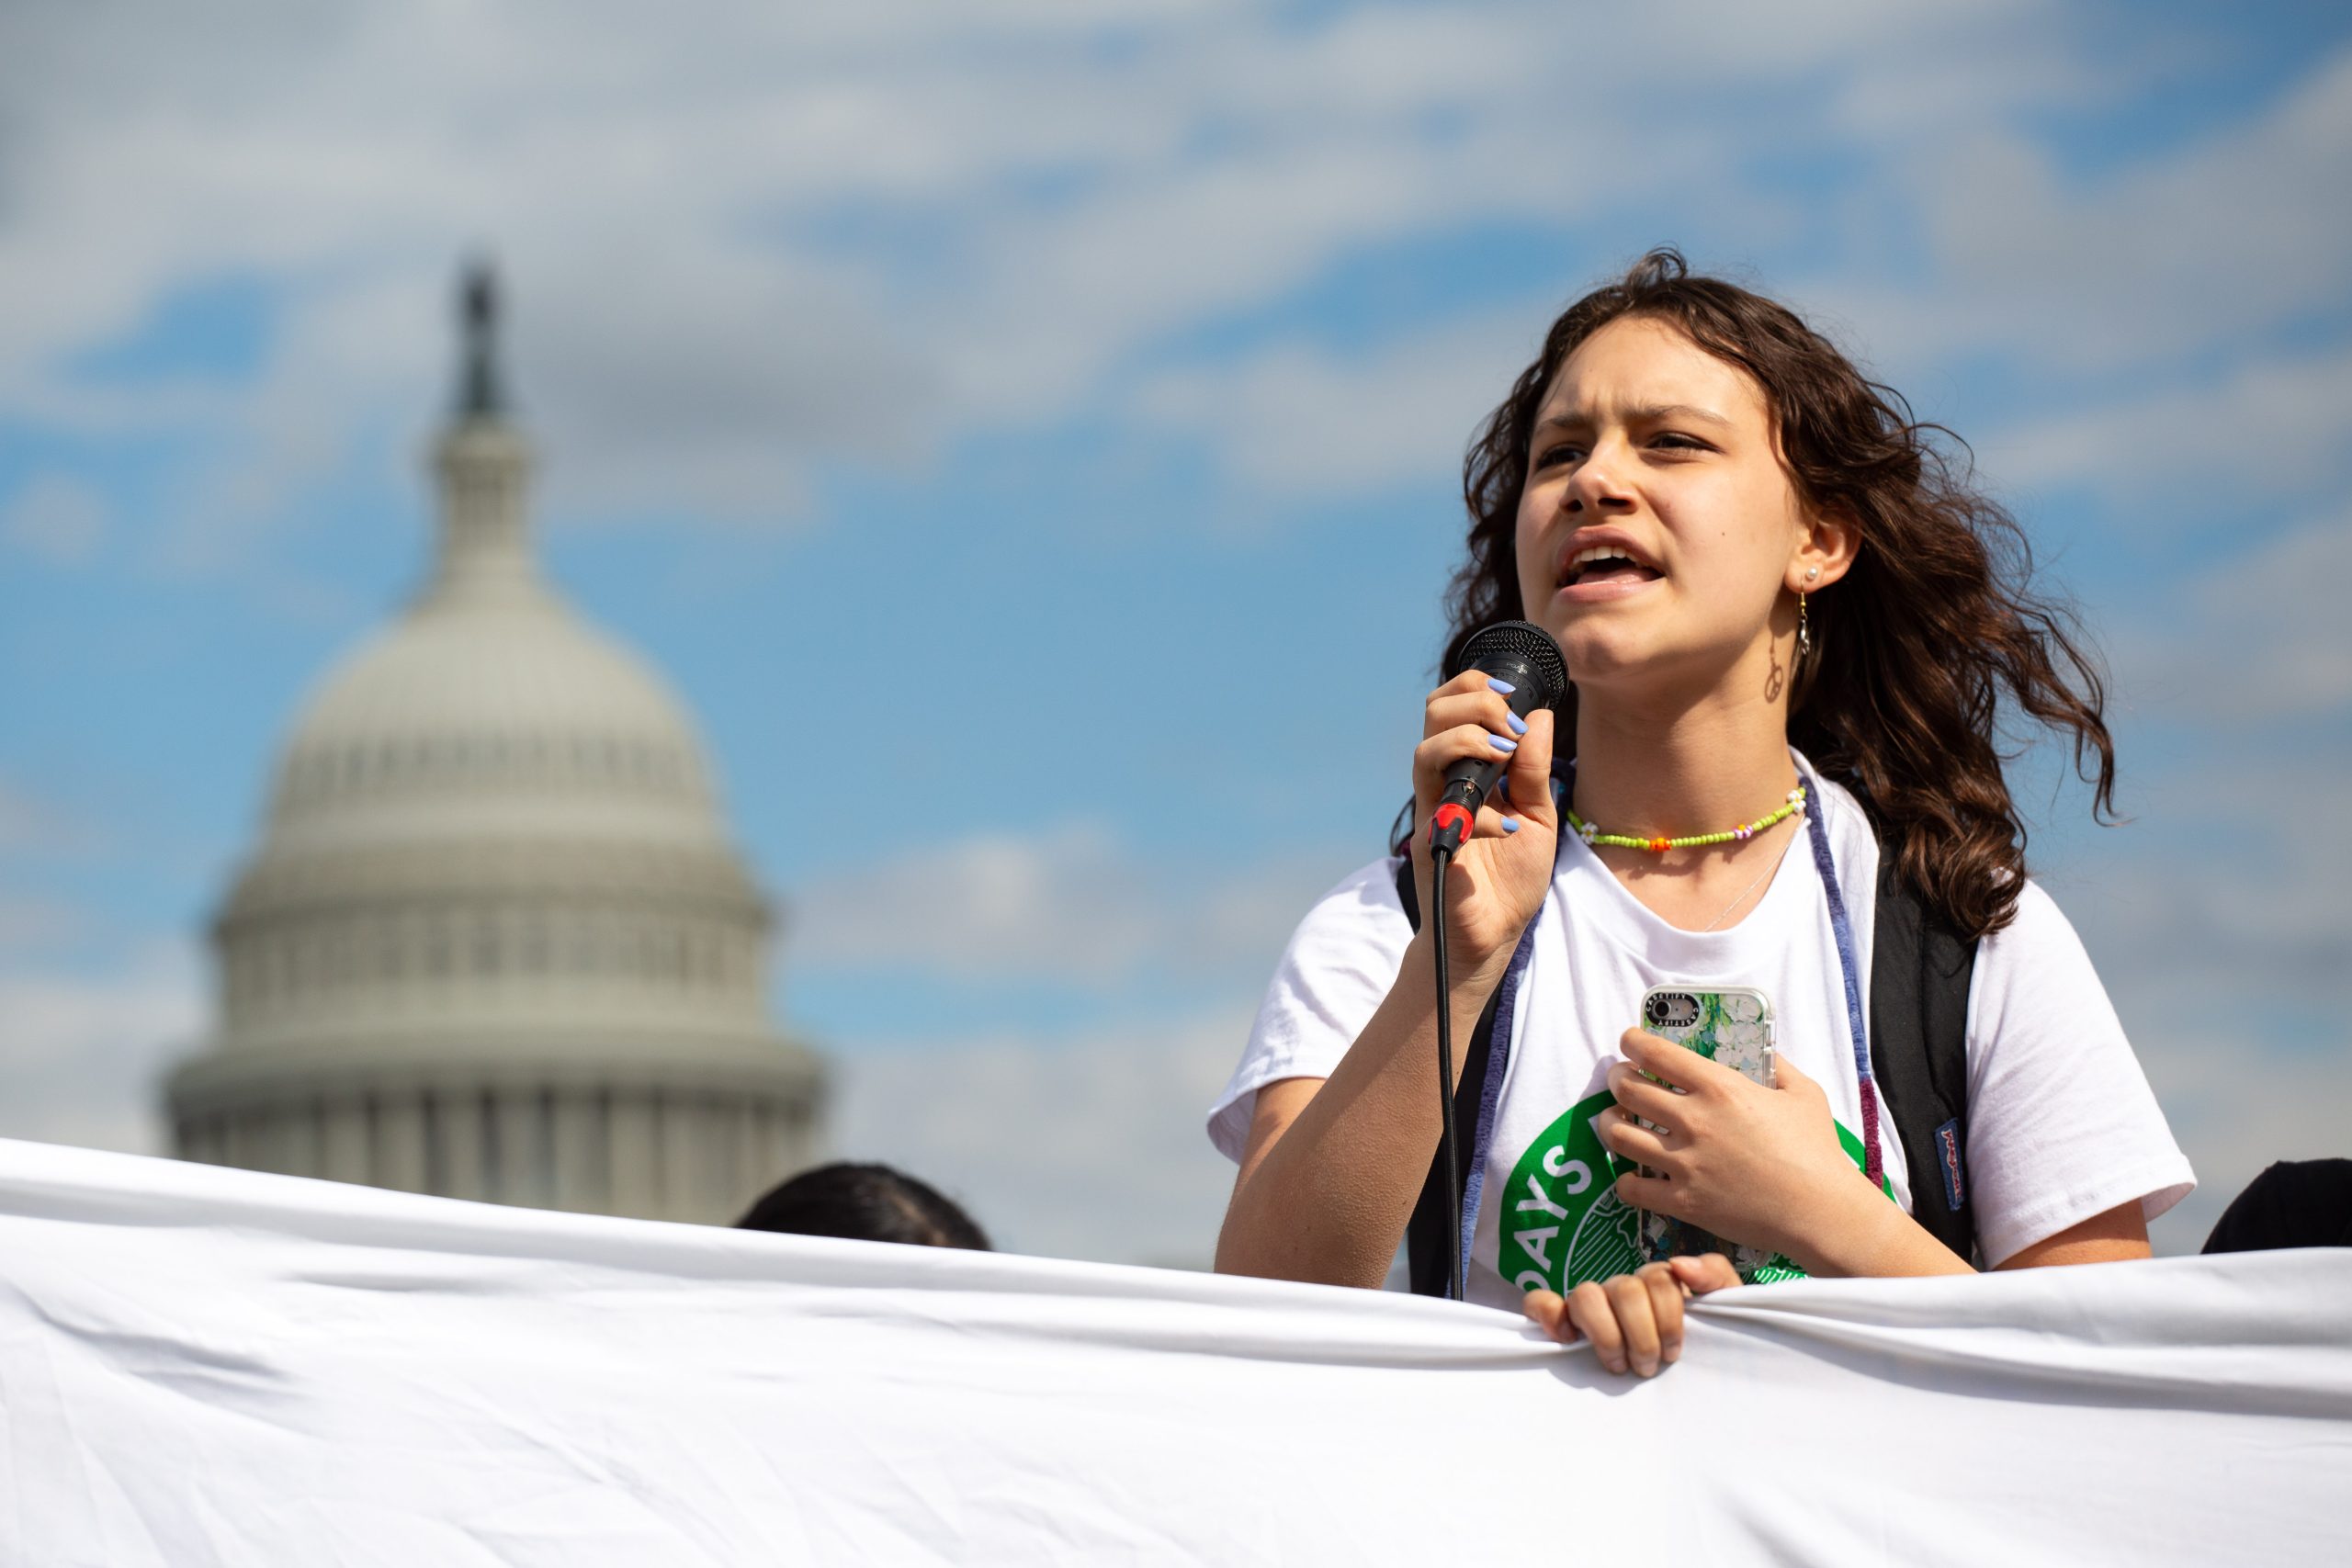 Photo: A climate activist speaks after a march from the White House to the U.S. Capitol on March 25, 2022. Credit: Bryan Olin Dozier/NurPhoto